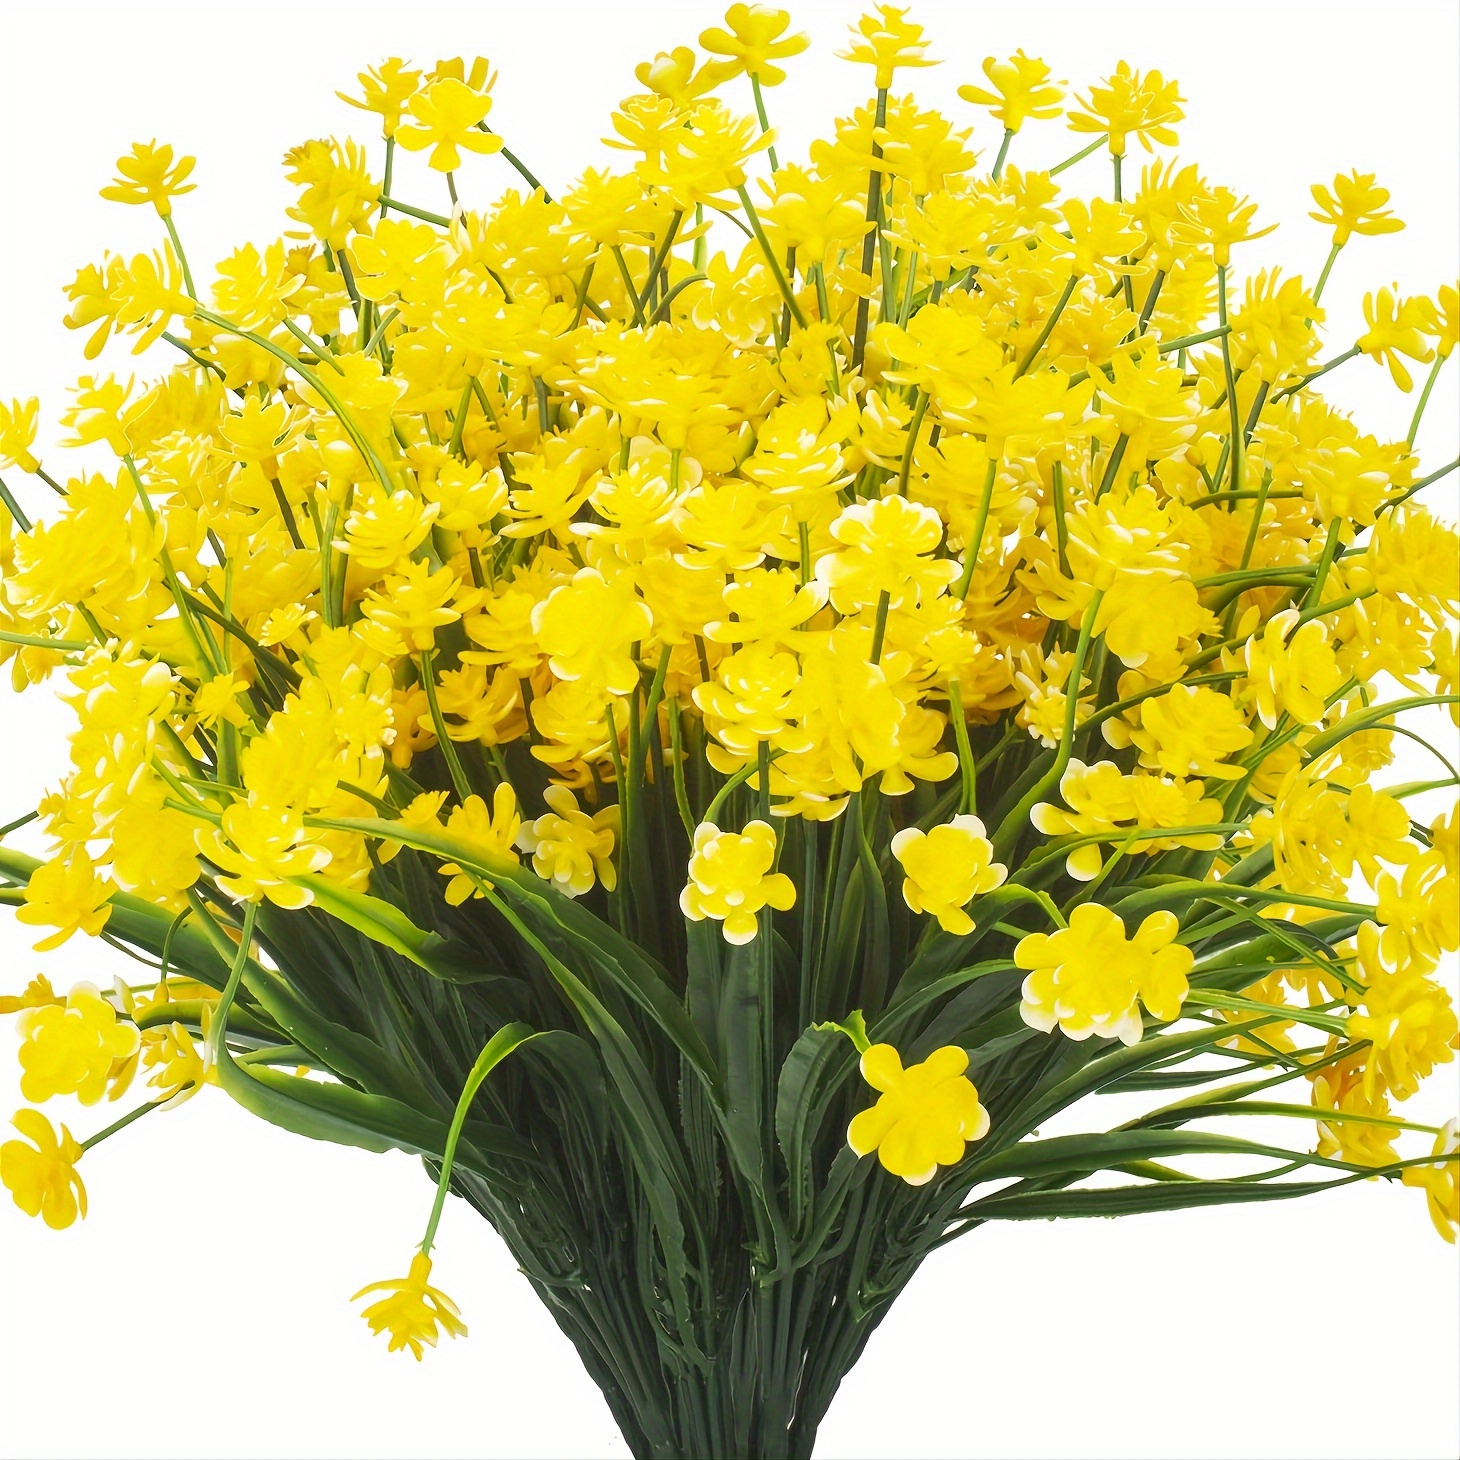 

4 Bundles Of Premium Artificial Flowers - Perfect For Outdoor Uv Resistance, Indoor Hanging Planters, And A Special Mother's Day